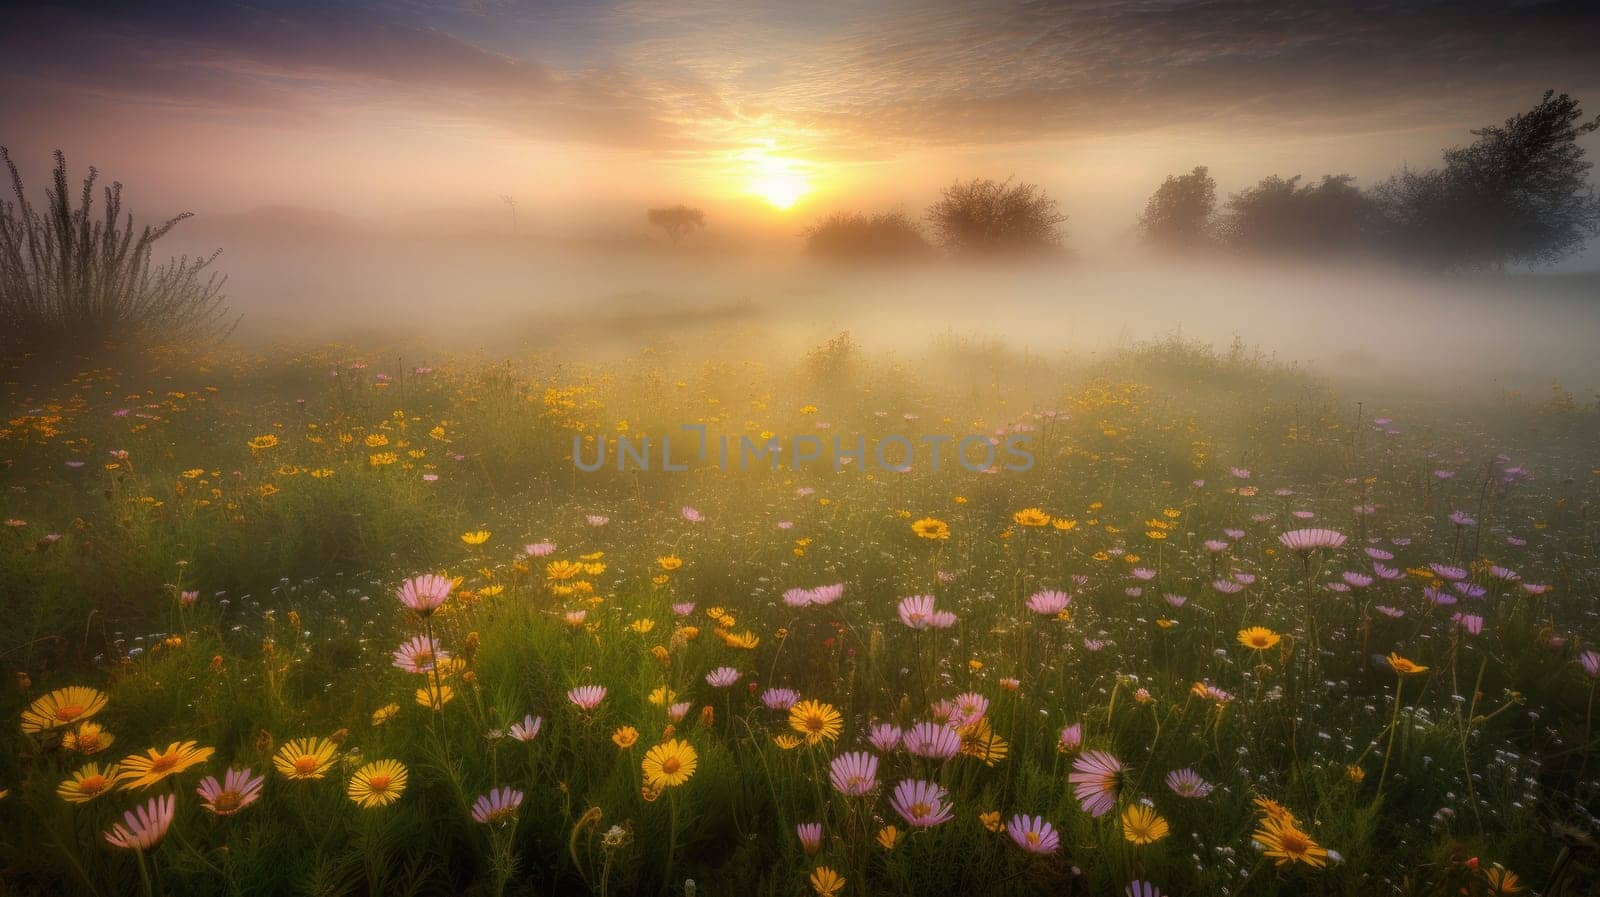 sunrise in the field. landscape with Magic pink Cosmos flowers in blooming with sunset background. fossilized field of colorful flowers, sunrise, mist. download photo